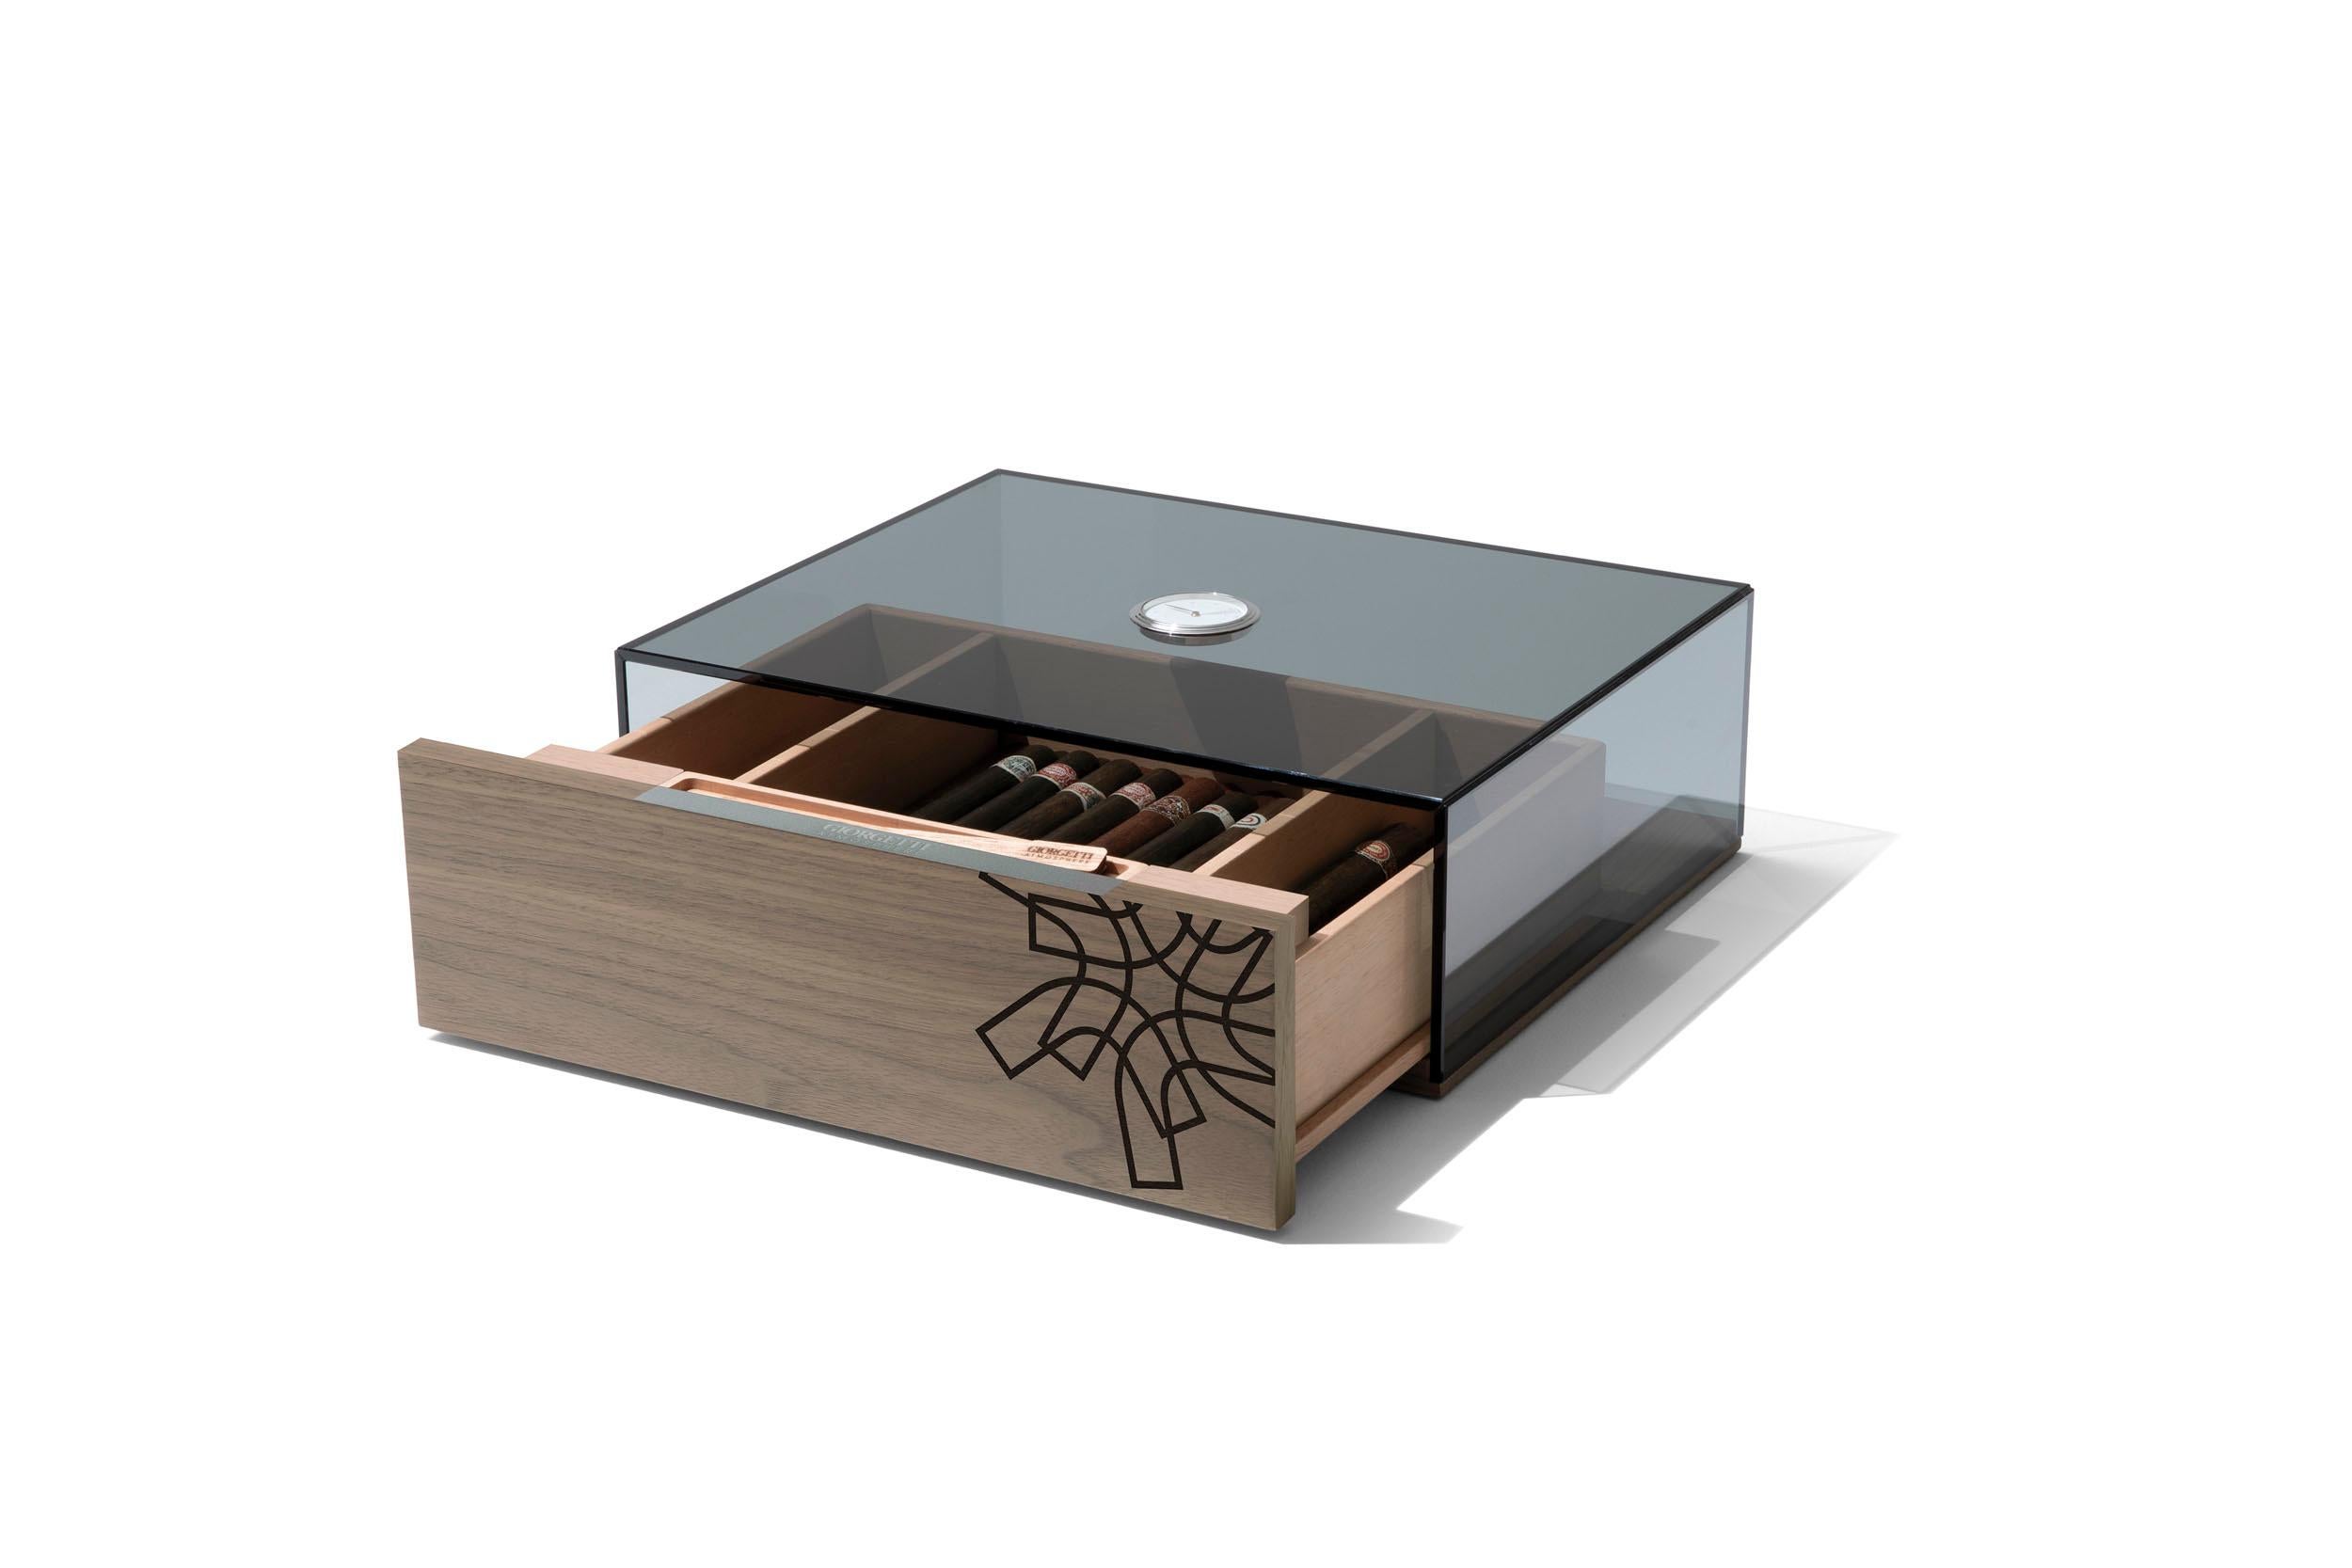 Canaletto walnut cigar box in gray finish (fin. 2W) with inlaid pictogram on wenge front. Untreated natural Spanish cedar interior and dividers.
Gray glass lid with built-in analog hygrometer. Internal static humidifier.
The front provides three